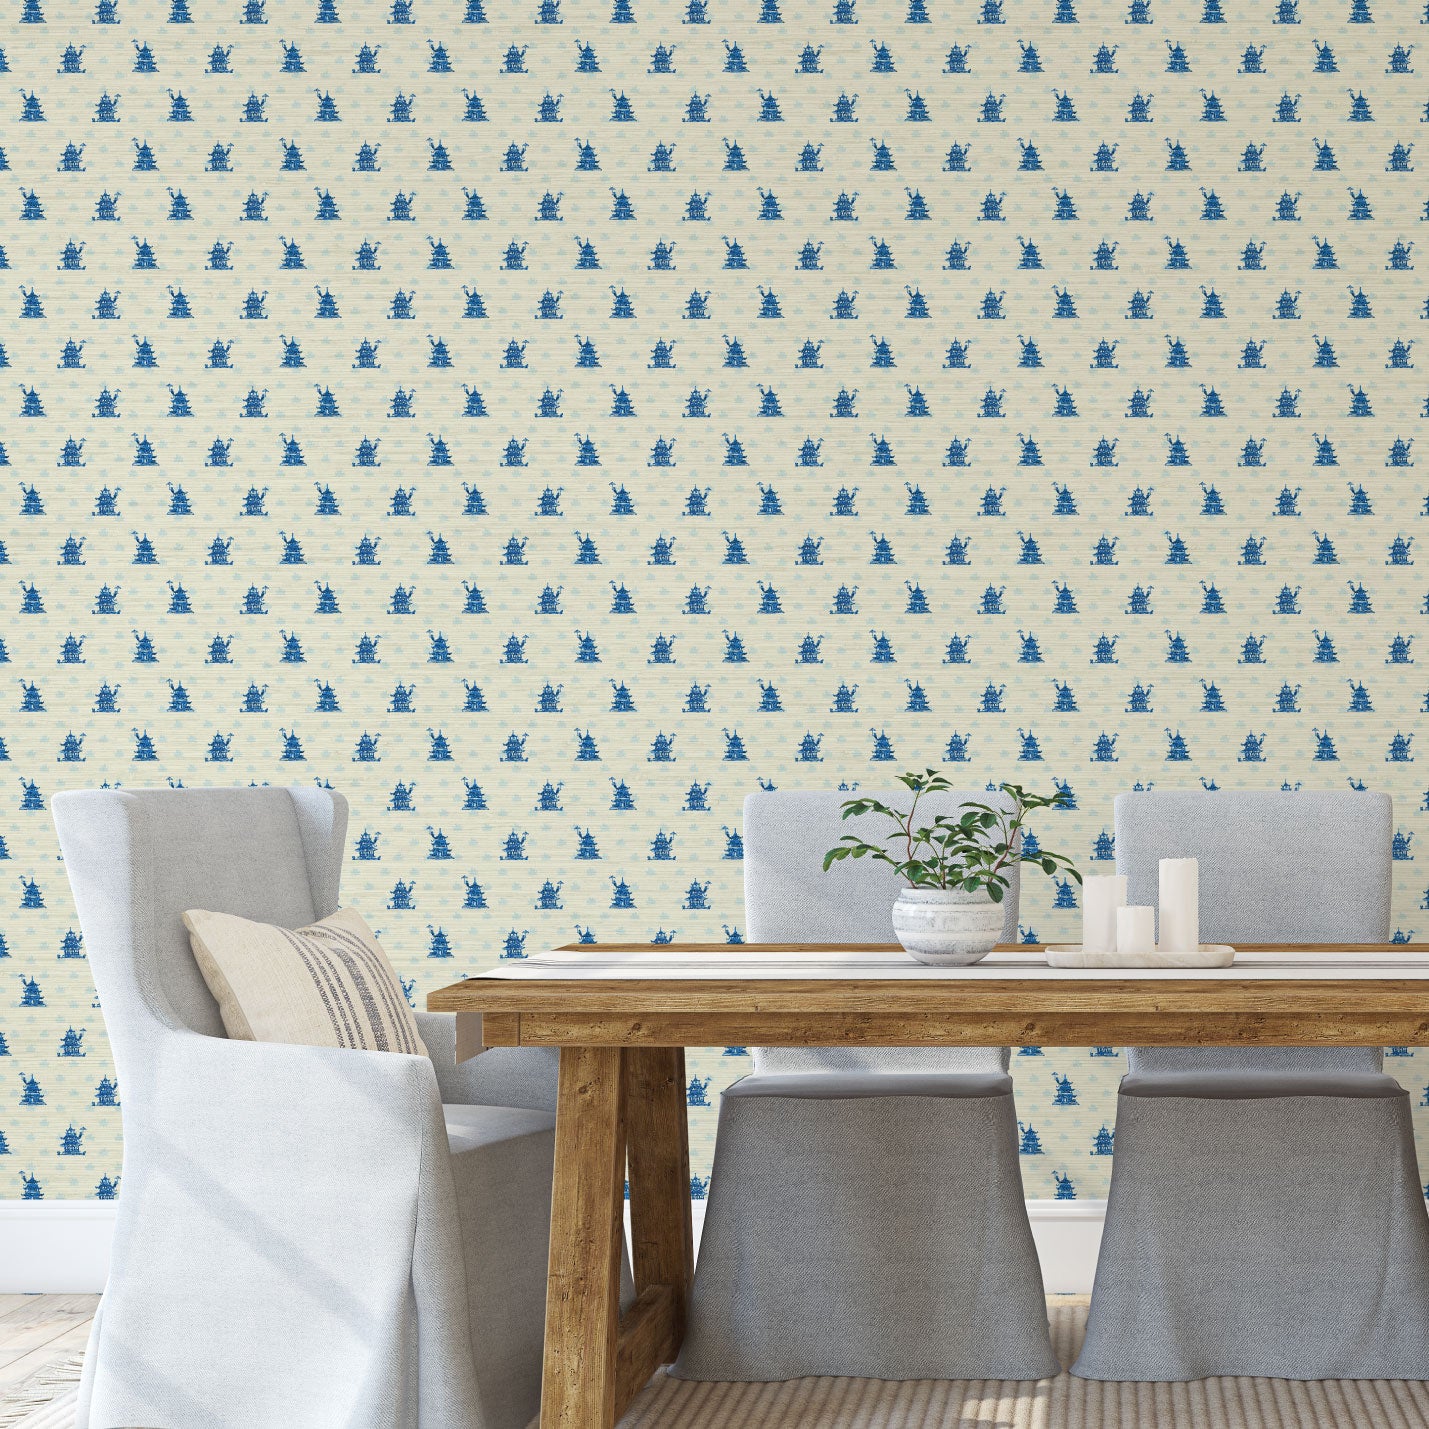 Grasscloth wallpaper Natural Textured Eco-Friendly Non-toxic High-quality  Sustainable Interior Design Bold Custom Tailor-made Retro chic Grandmillennial Maximalism  Traditional Dopamine decor french blue cream royal off-white chintz chinoiserie asian inspired pagoda chinese stripe geo geometric 